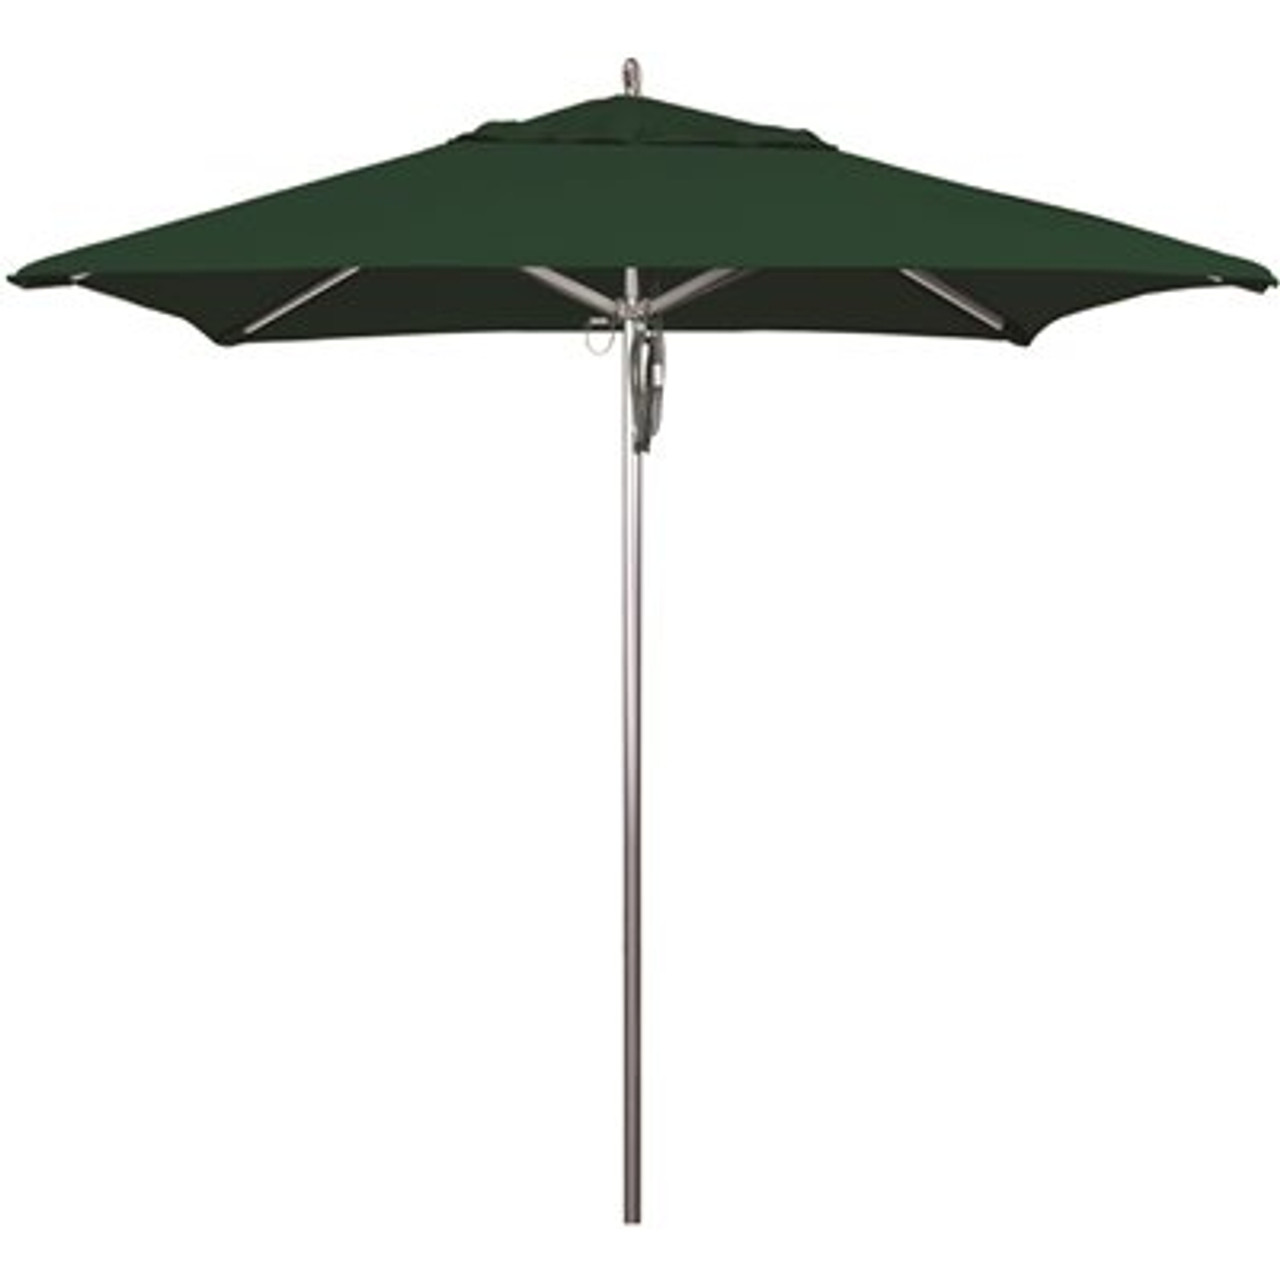 7.5 ft. Square Silver Aluminum Commercial Market Patio Umbrella with Pulley Lift in Forest Green Sunbrella